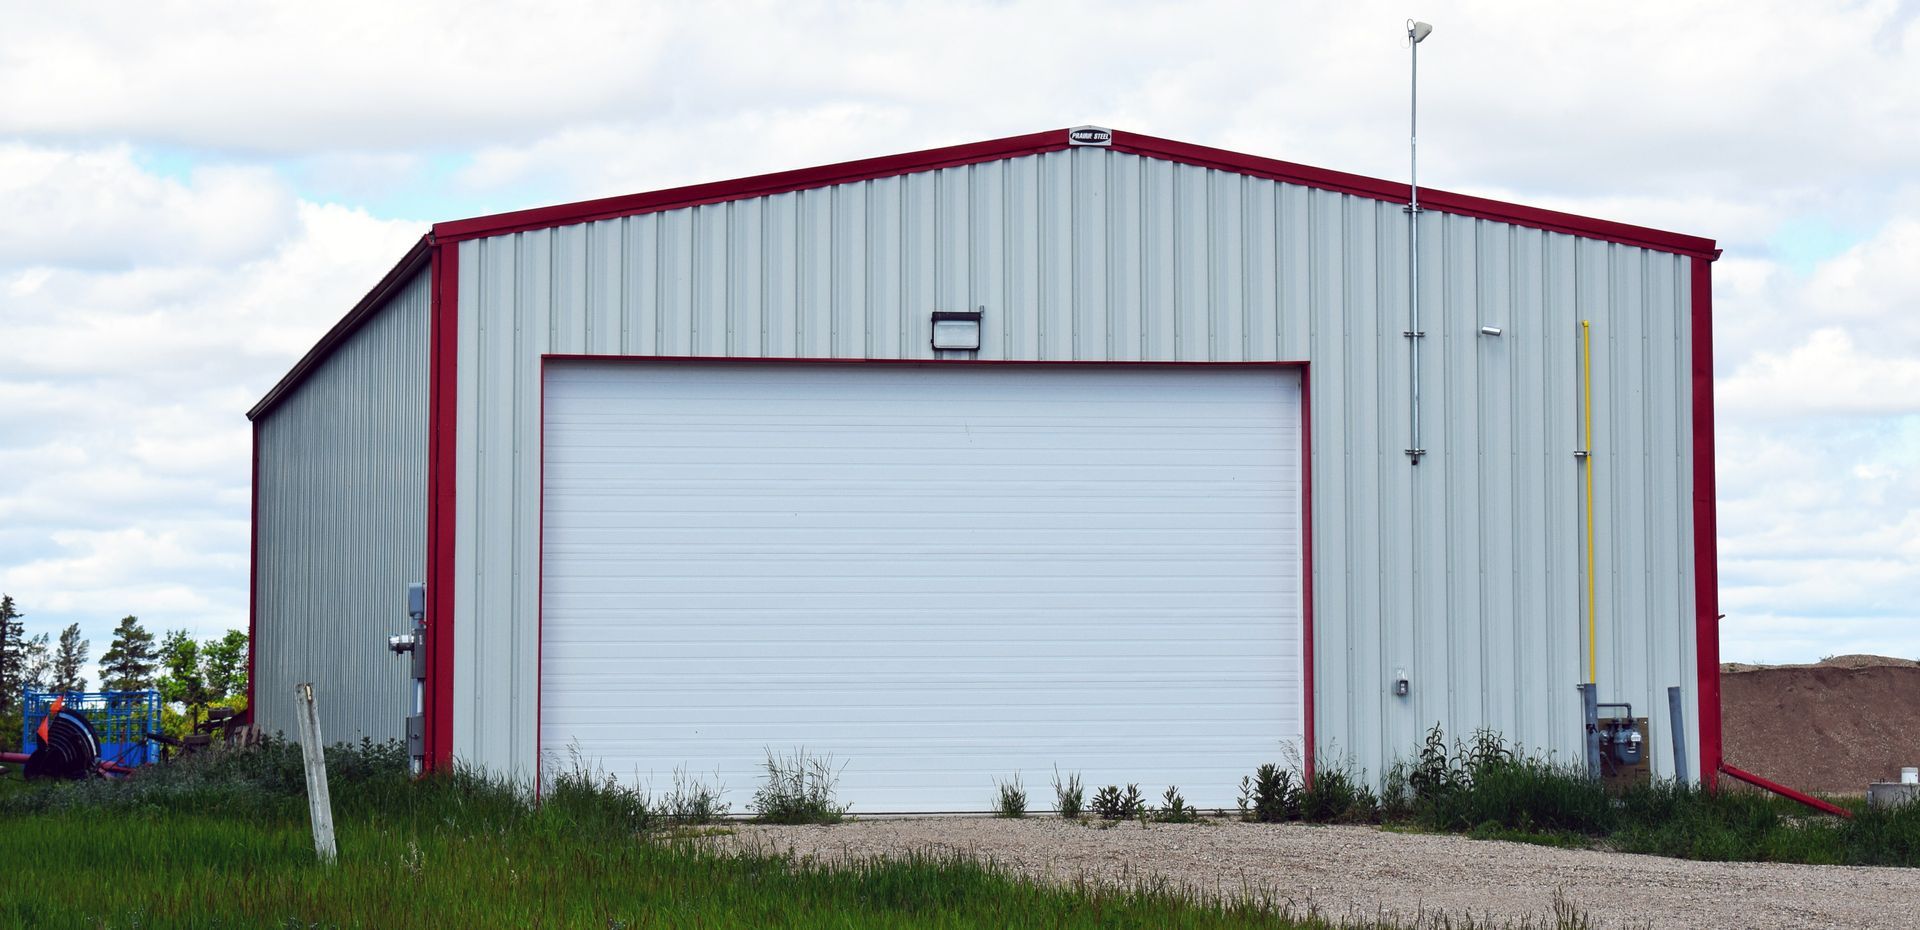 A white building with a red trim and a white garage door.